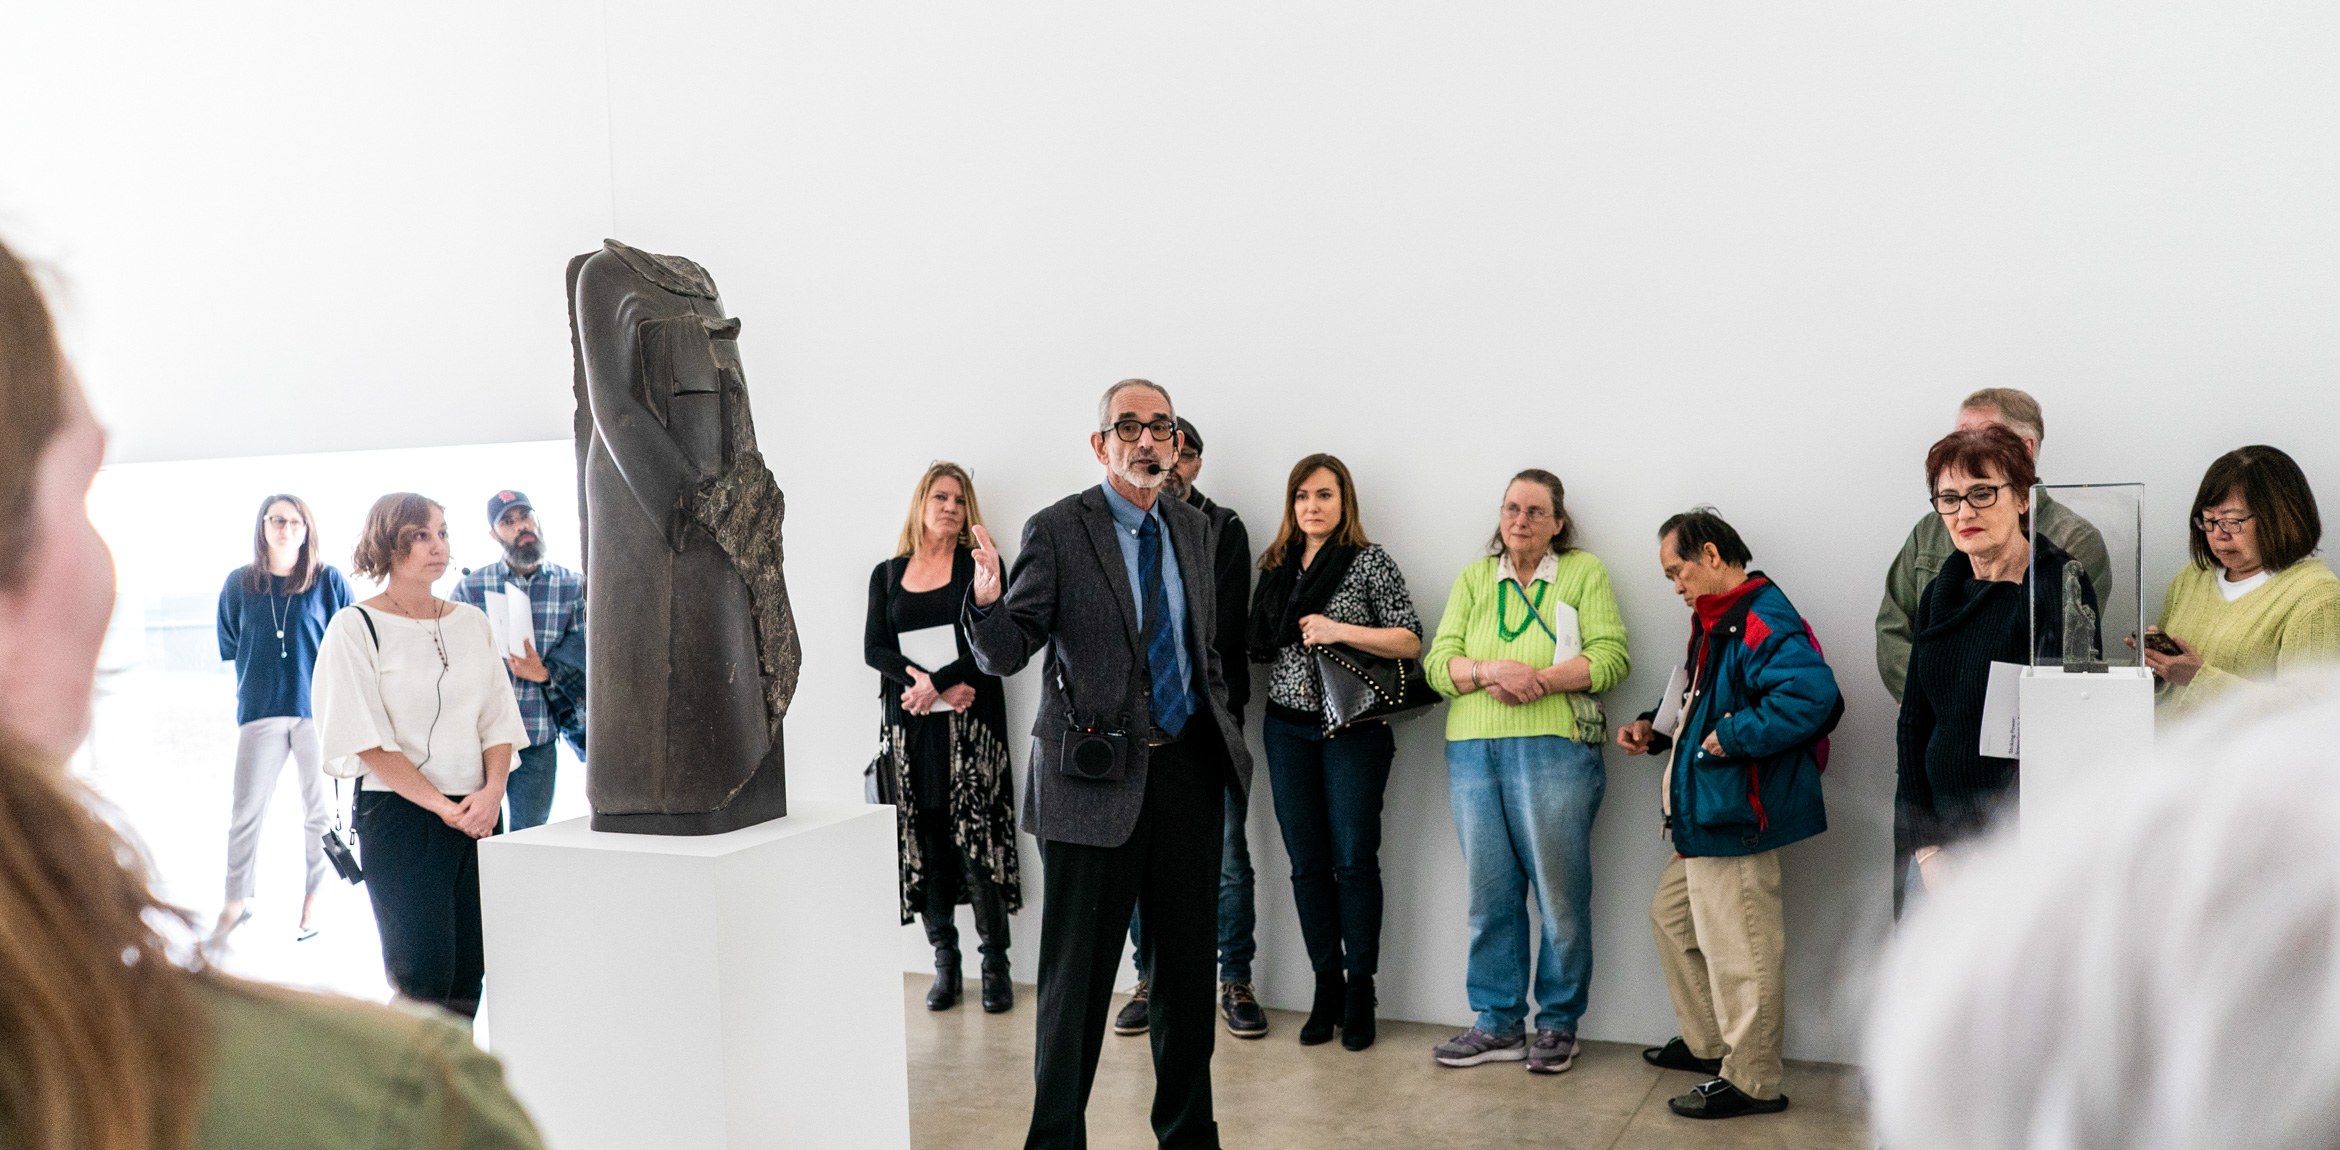 Ed Bleiberg speaks in the Main Gallery to a large circle of attendees, gesturing at a beheaded Egyptian sculpture.